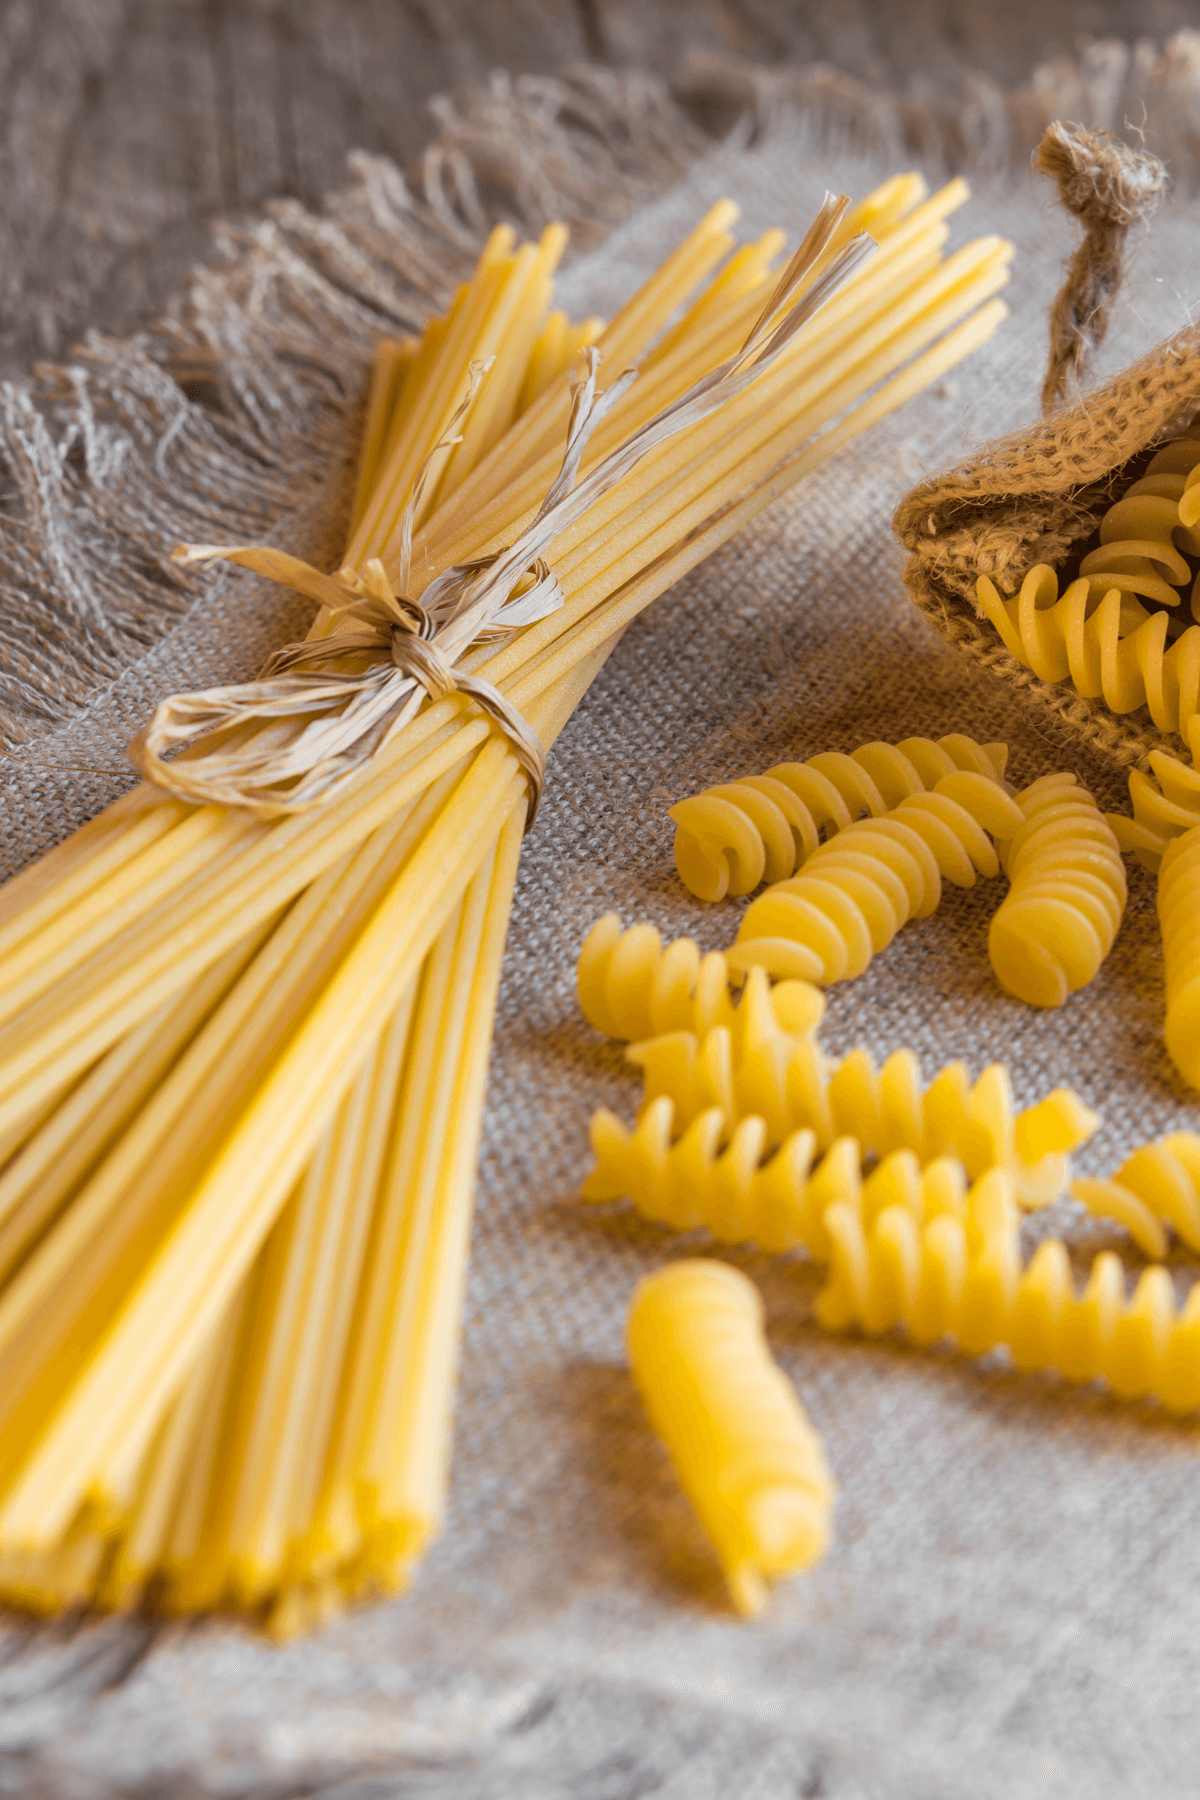 Vegan dry pasta in the shape of spaghetti and spirals on a tan tablecloth.